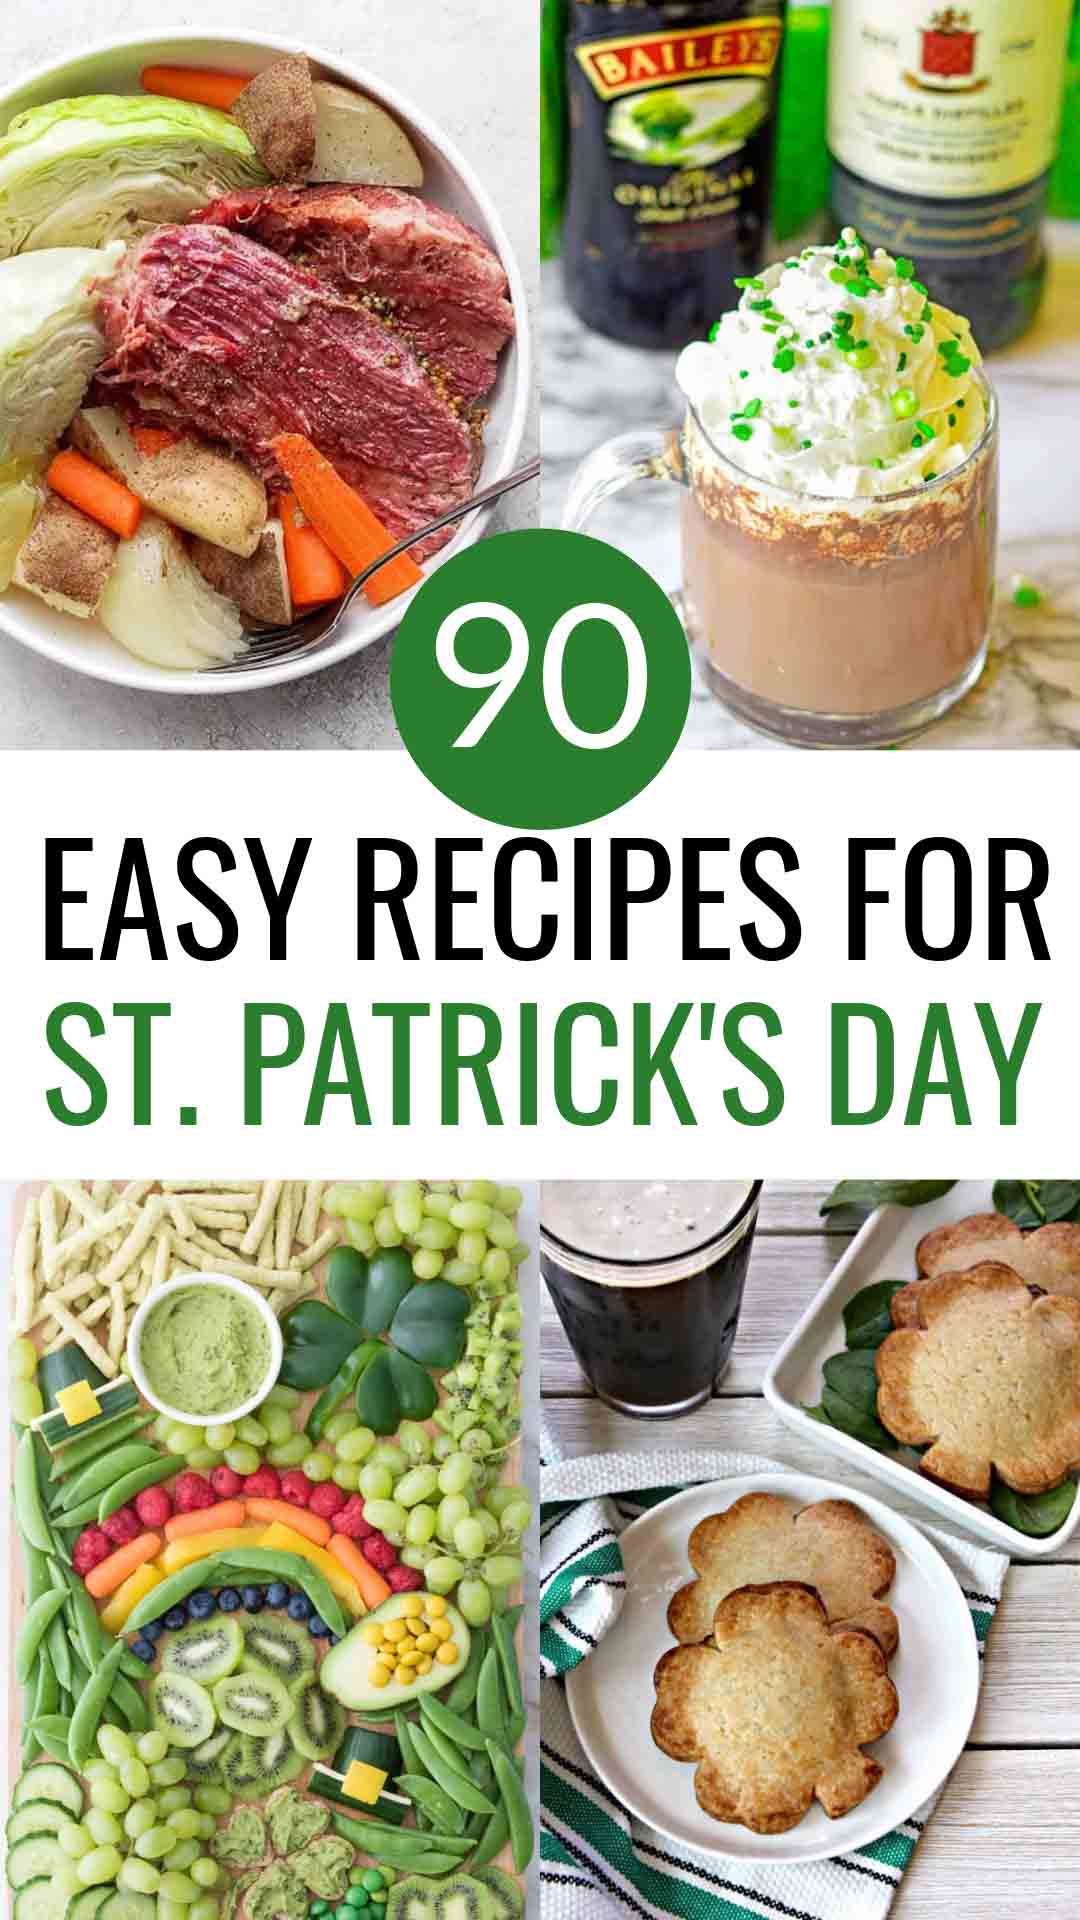 90 Easy Recipes For St. Patrick's Day with images of corned beef and cabbage, Irish hot chocolate, Paddy Pockets, and healthy St. Patrick's Day snack board